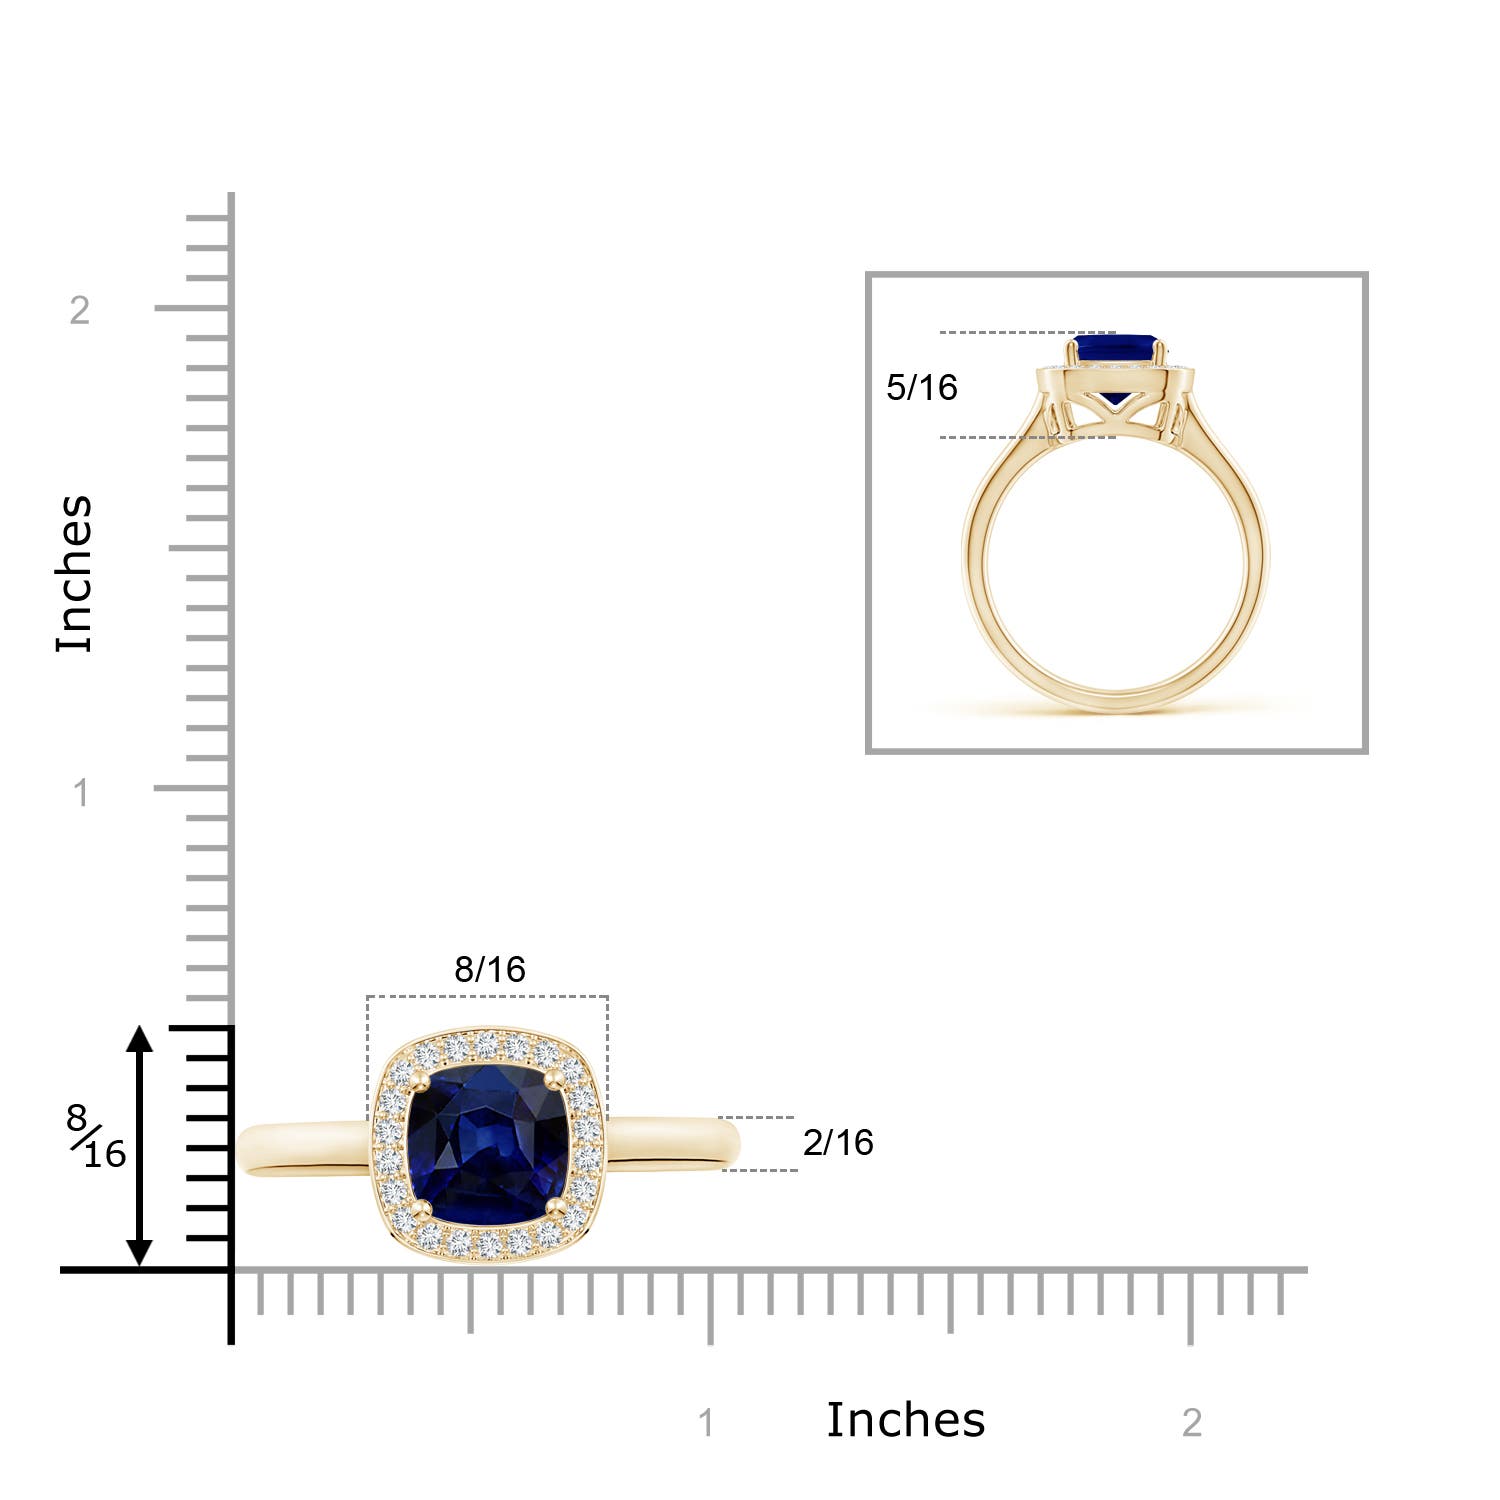 AAA - Blue Sapphire / 1.18 CT / 14 KT Yellow Gold